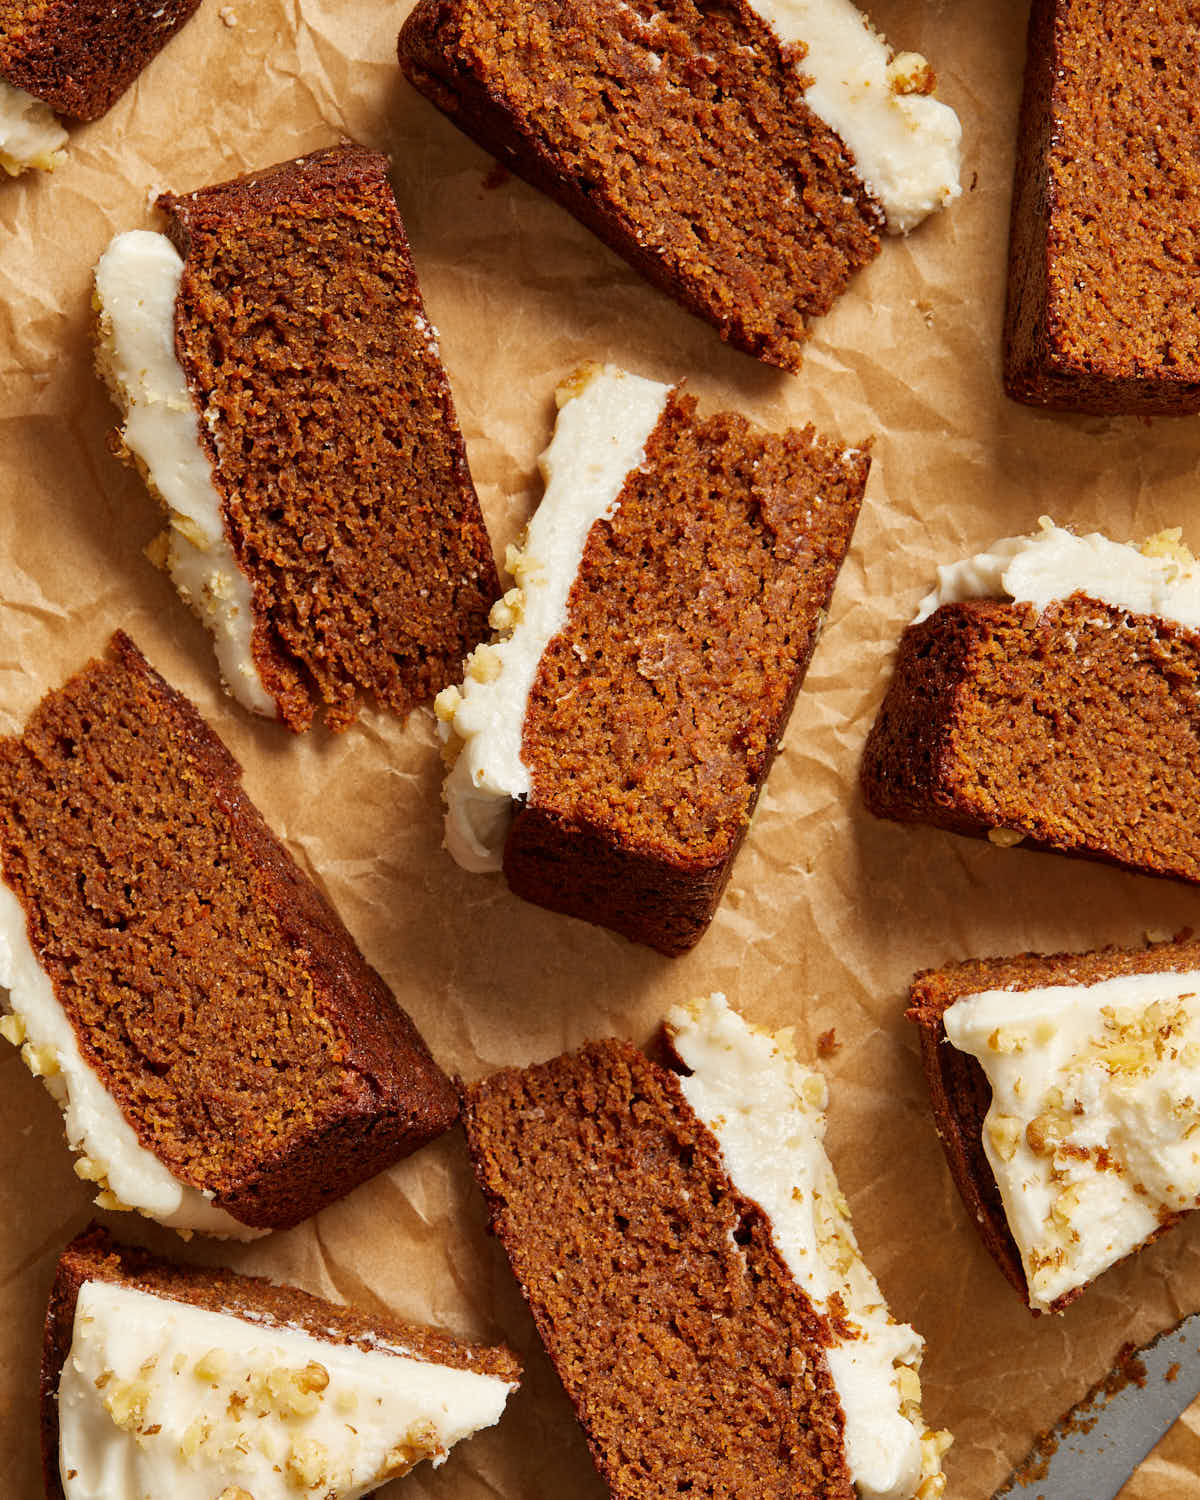 Overhead view of multiple slices of carrot cake arranged on crumpled brown parchment paper.